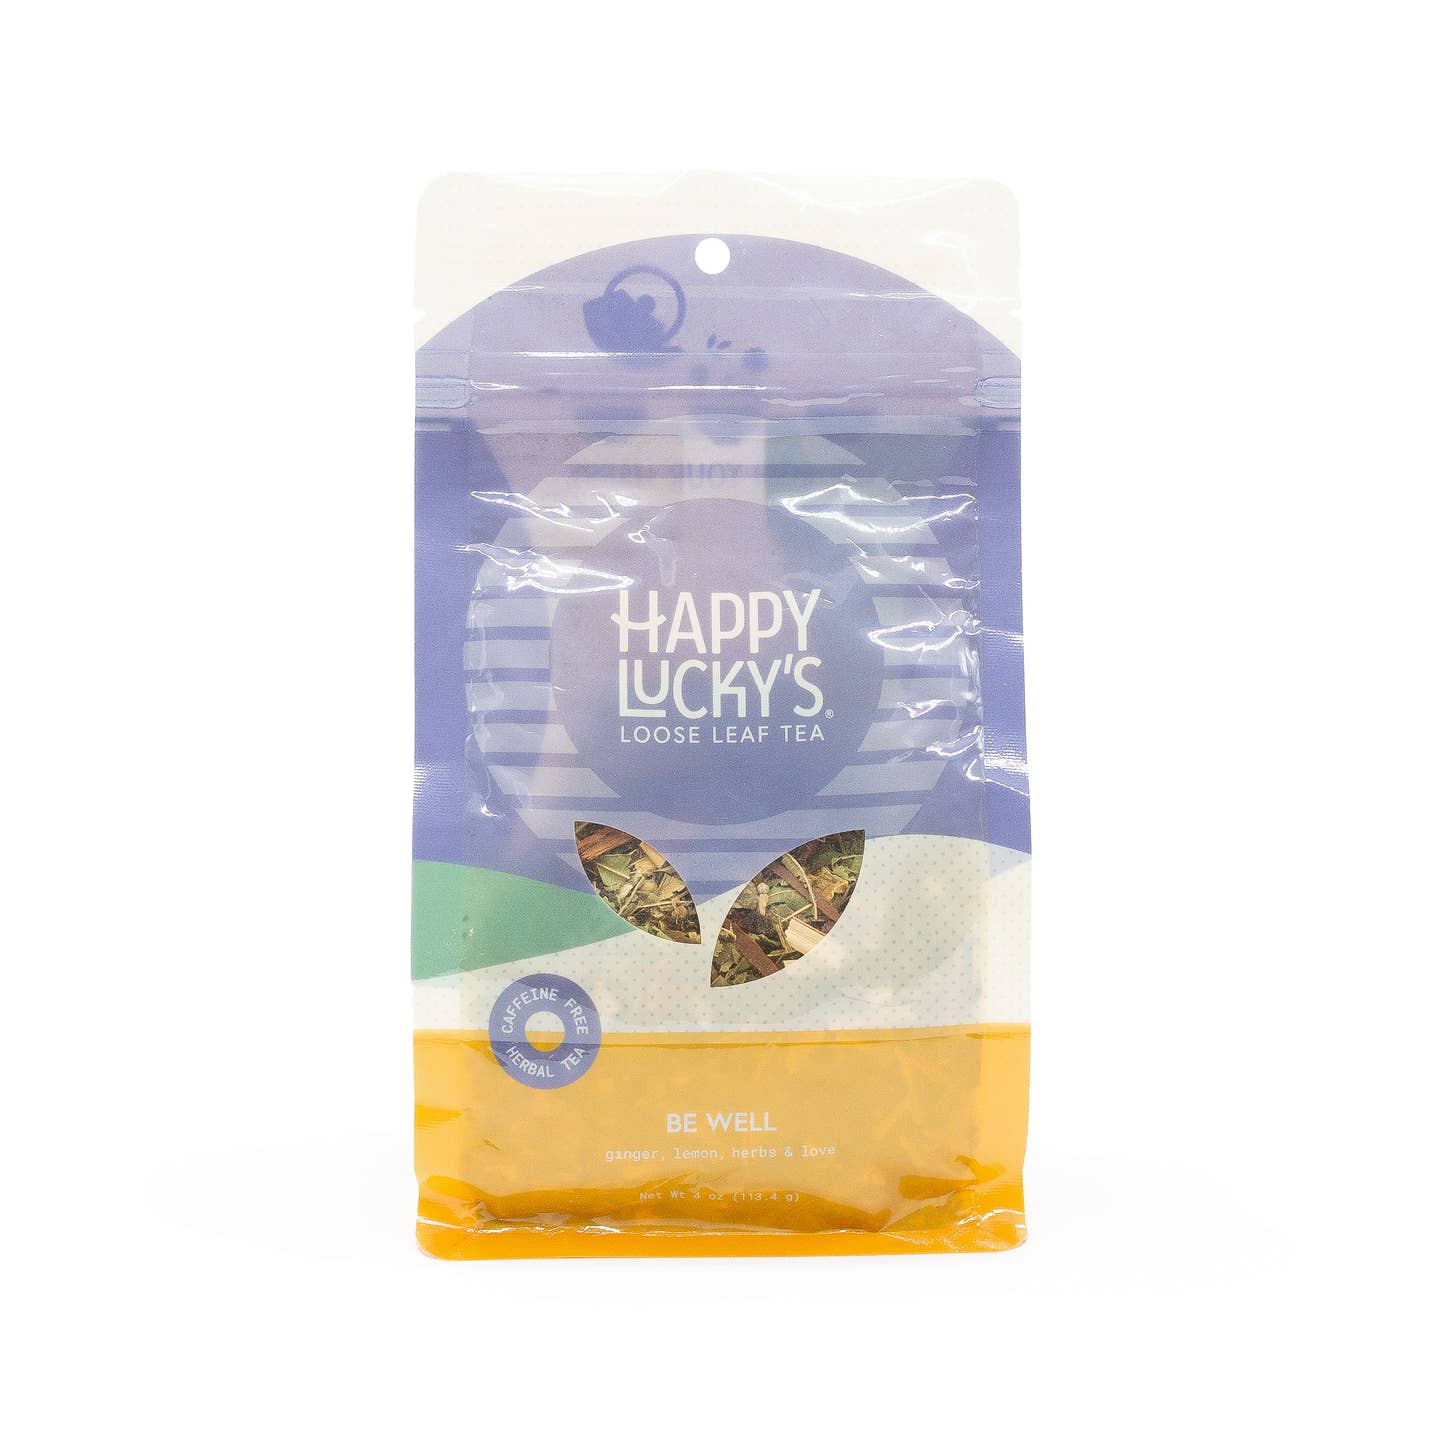 Be Well by Happy Lucky's loose leaf herbal tea package